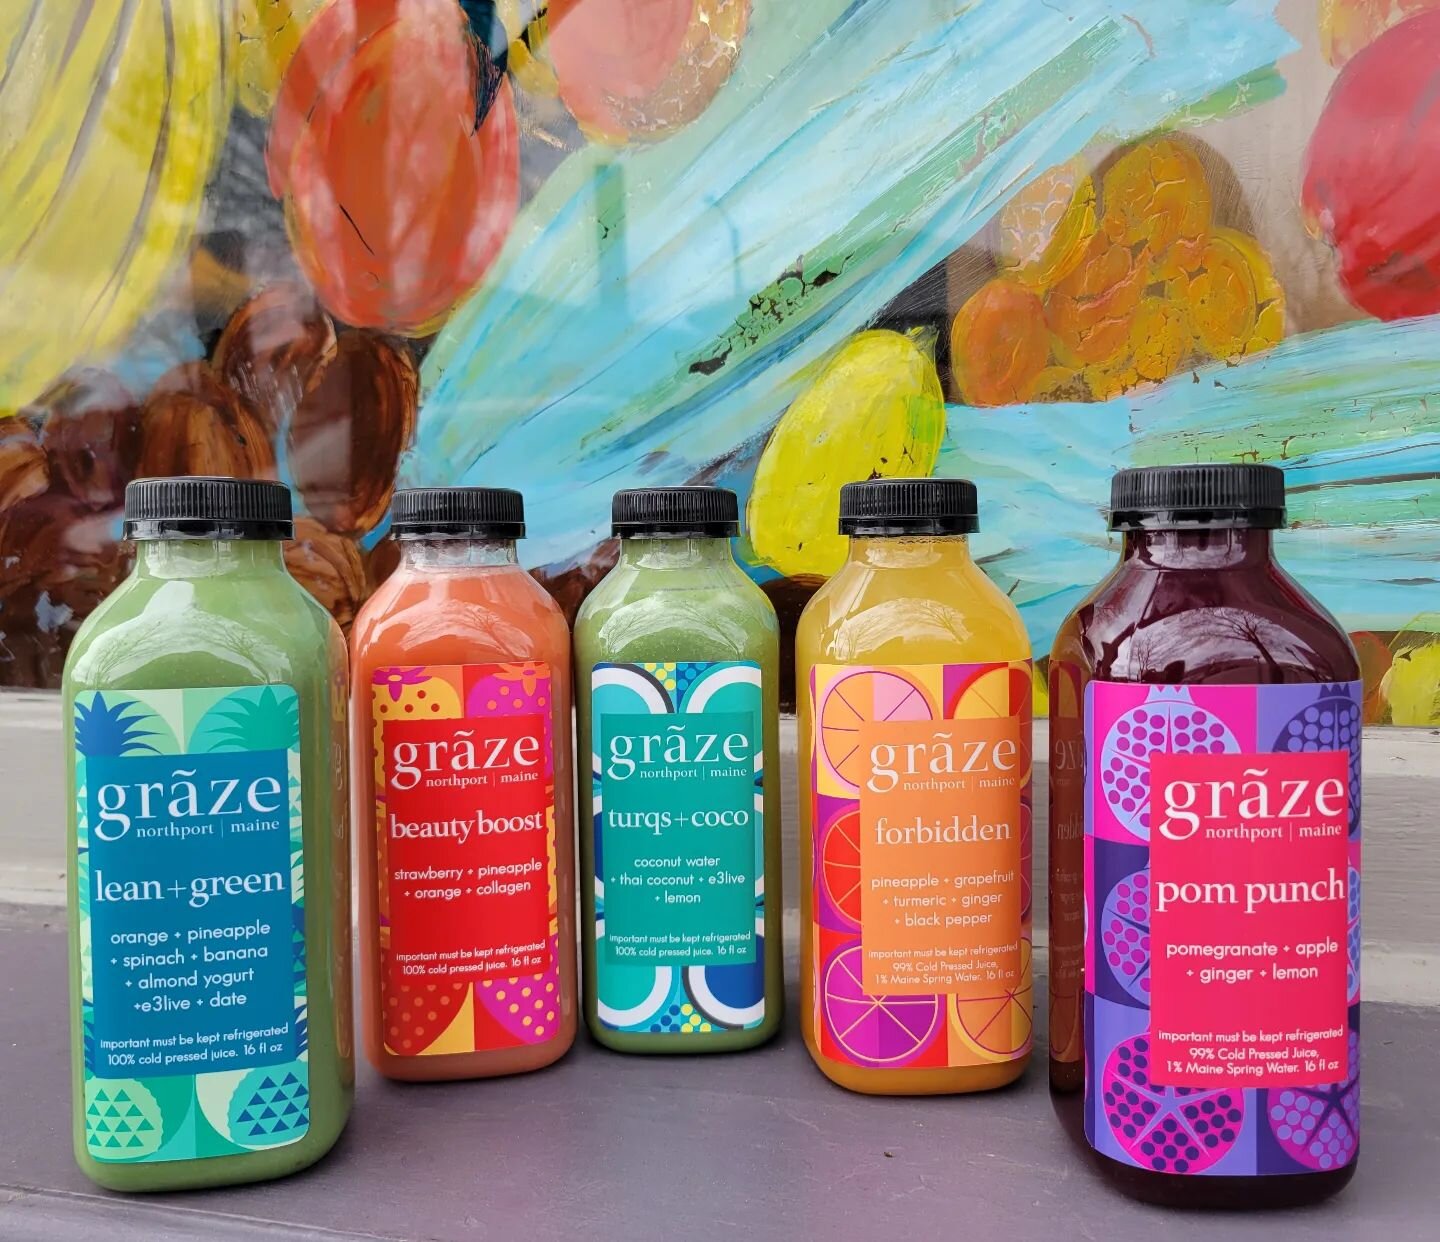 Fresh, cold pressed juices from @graze_maine are as delicious as they look! Turqs + coco is the newest staff favorite!